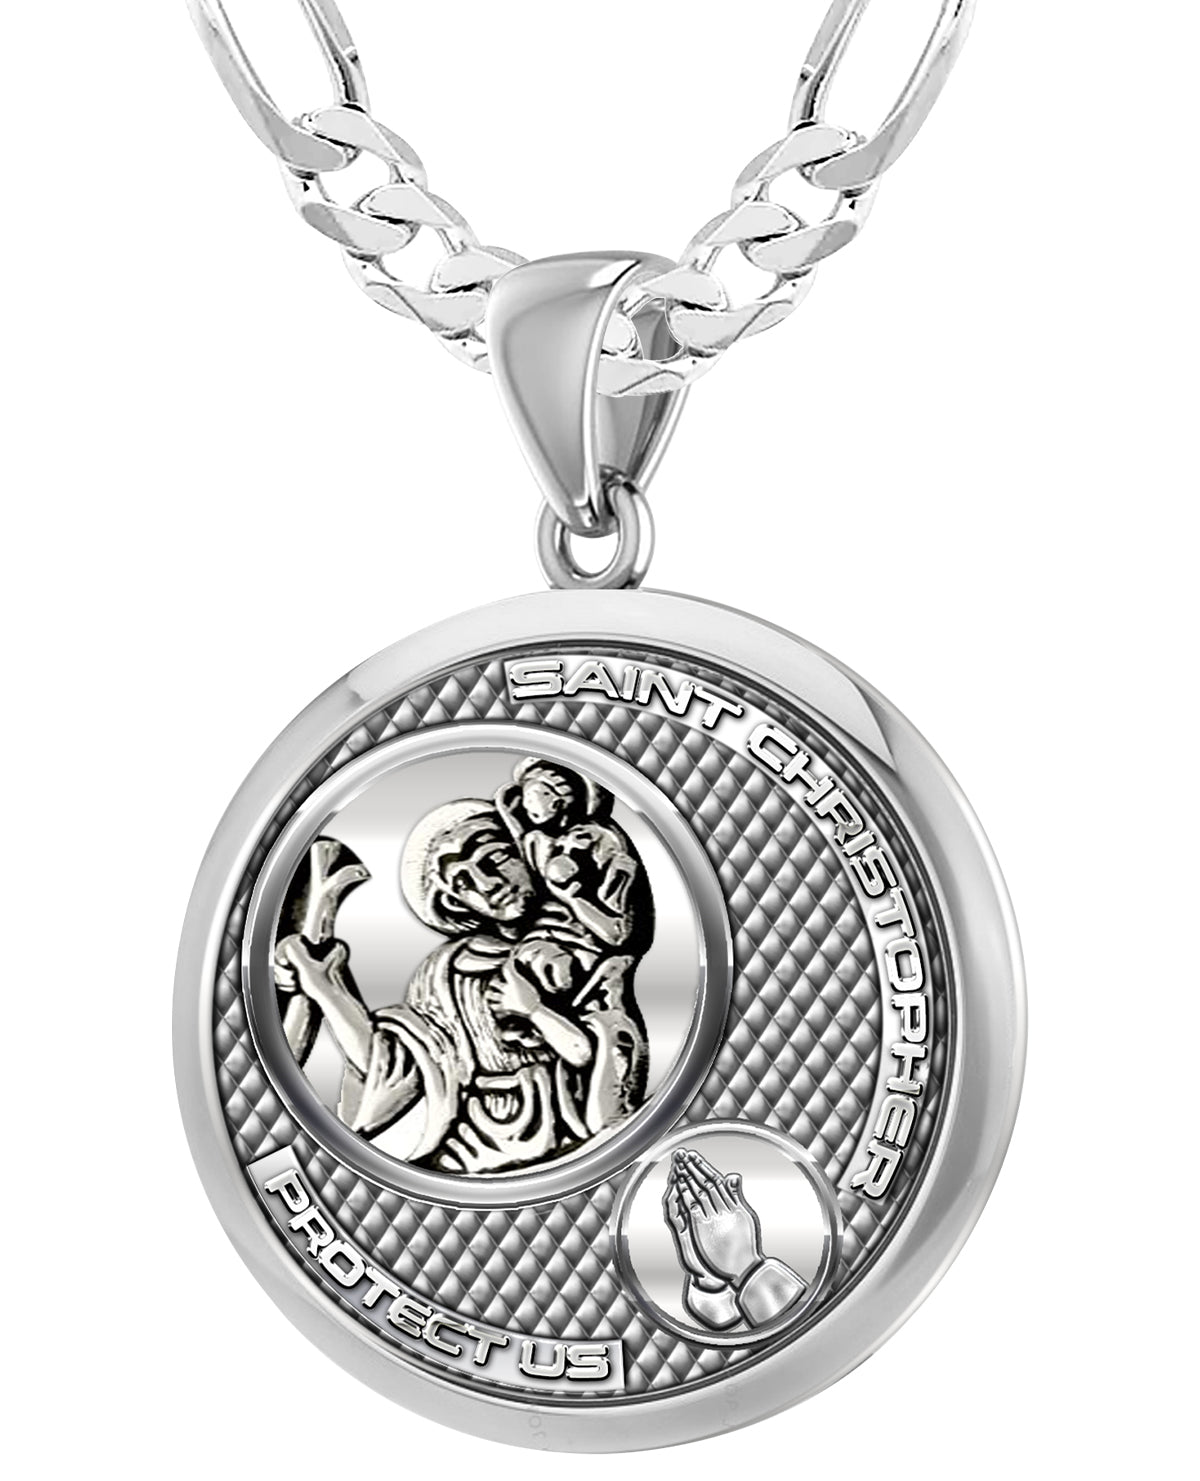 Men's 925 Sterling Silver Round Saint Christopher Round Polished Finish Pendant Necklace, 33mm - US Jewels